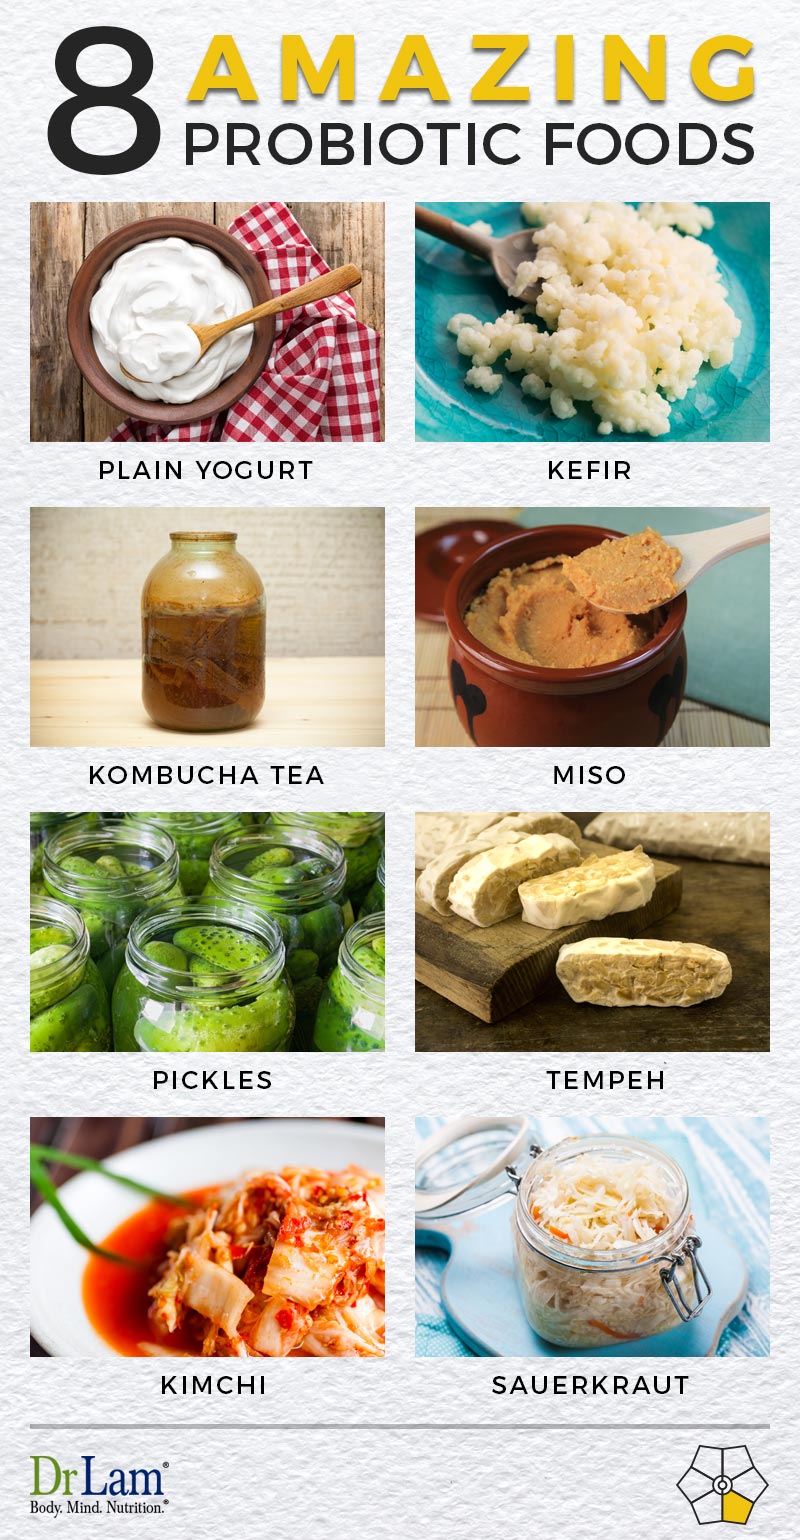 Check out this easy to understand infographic about the 8 amazing probiotic foods